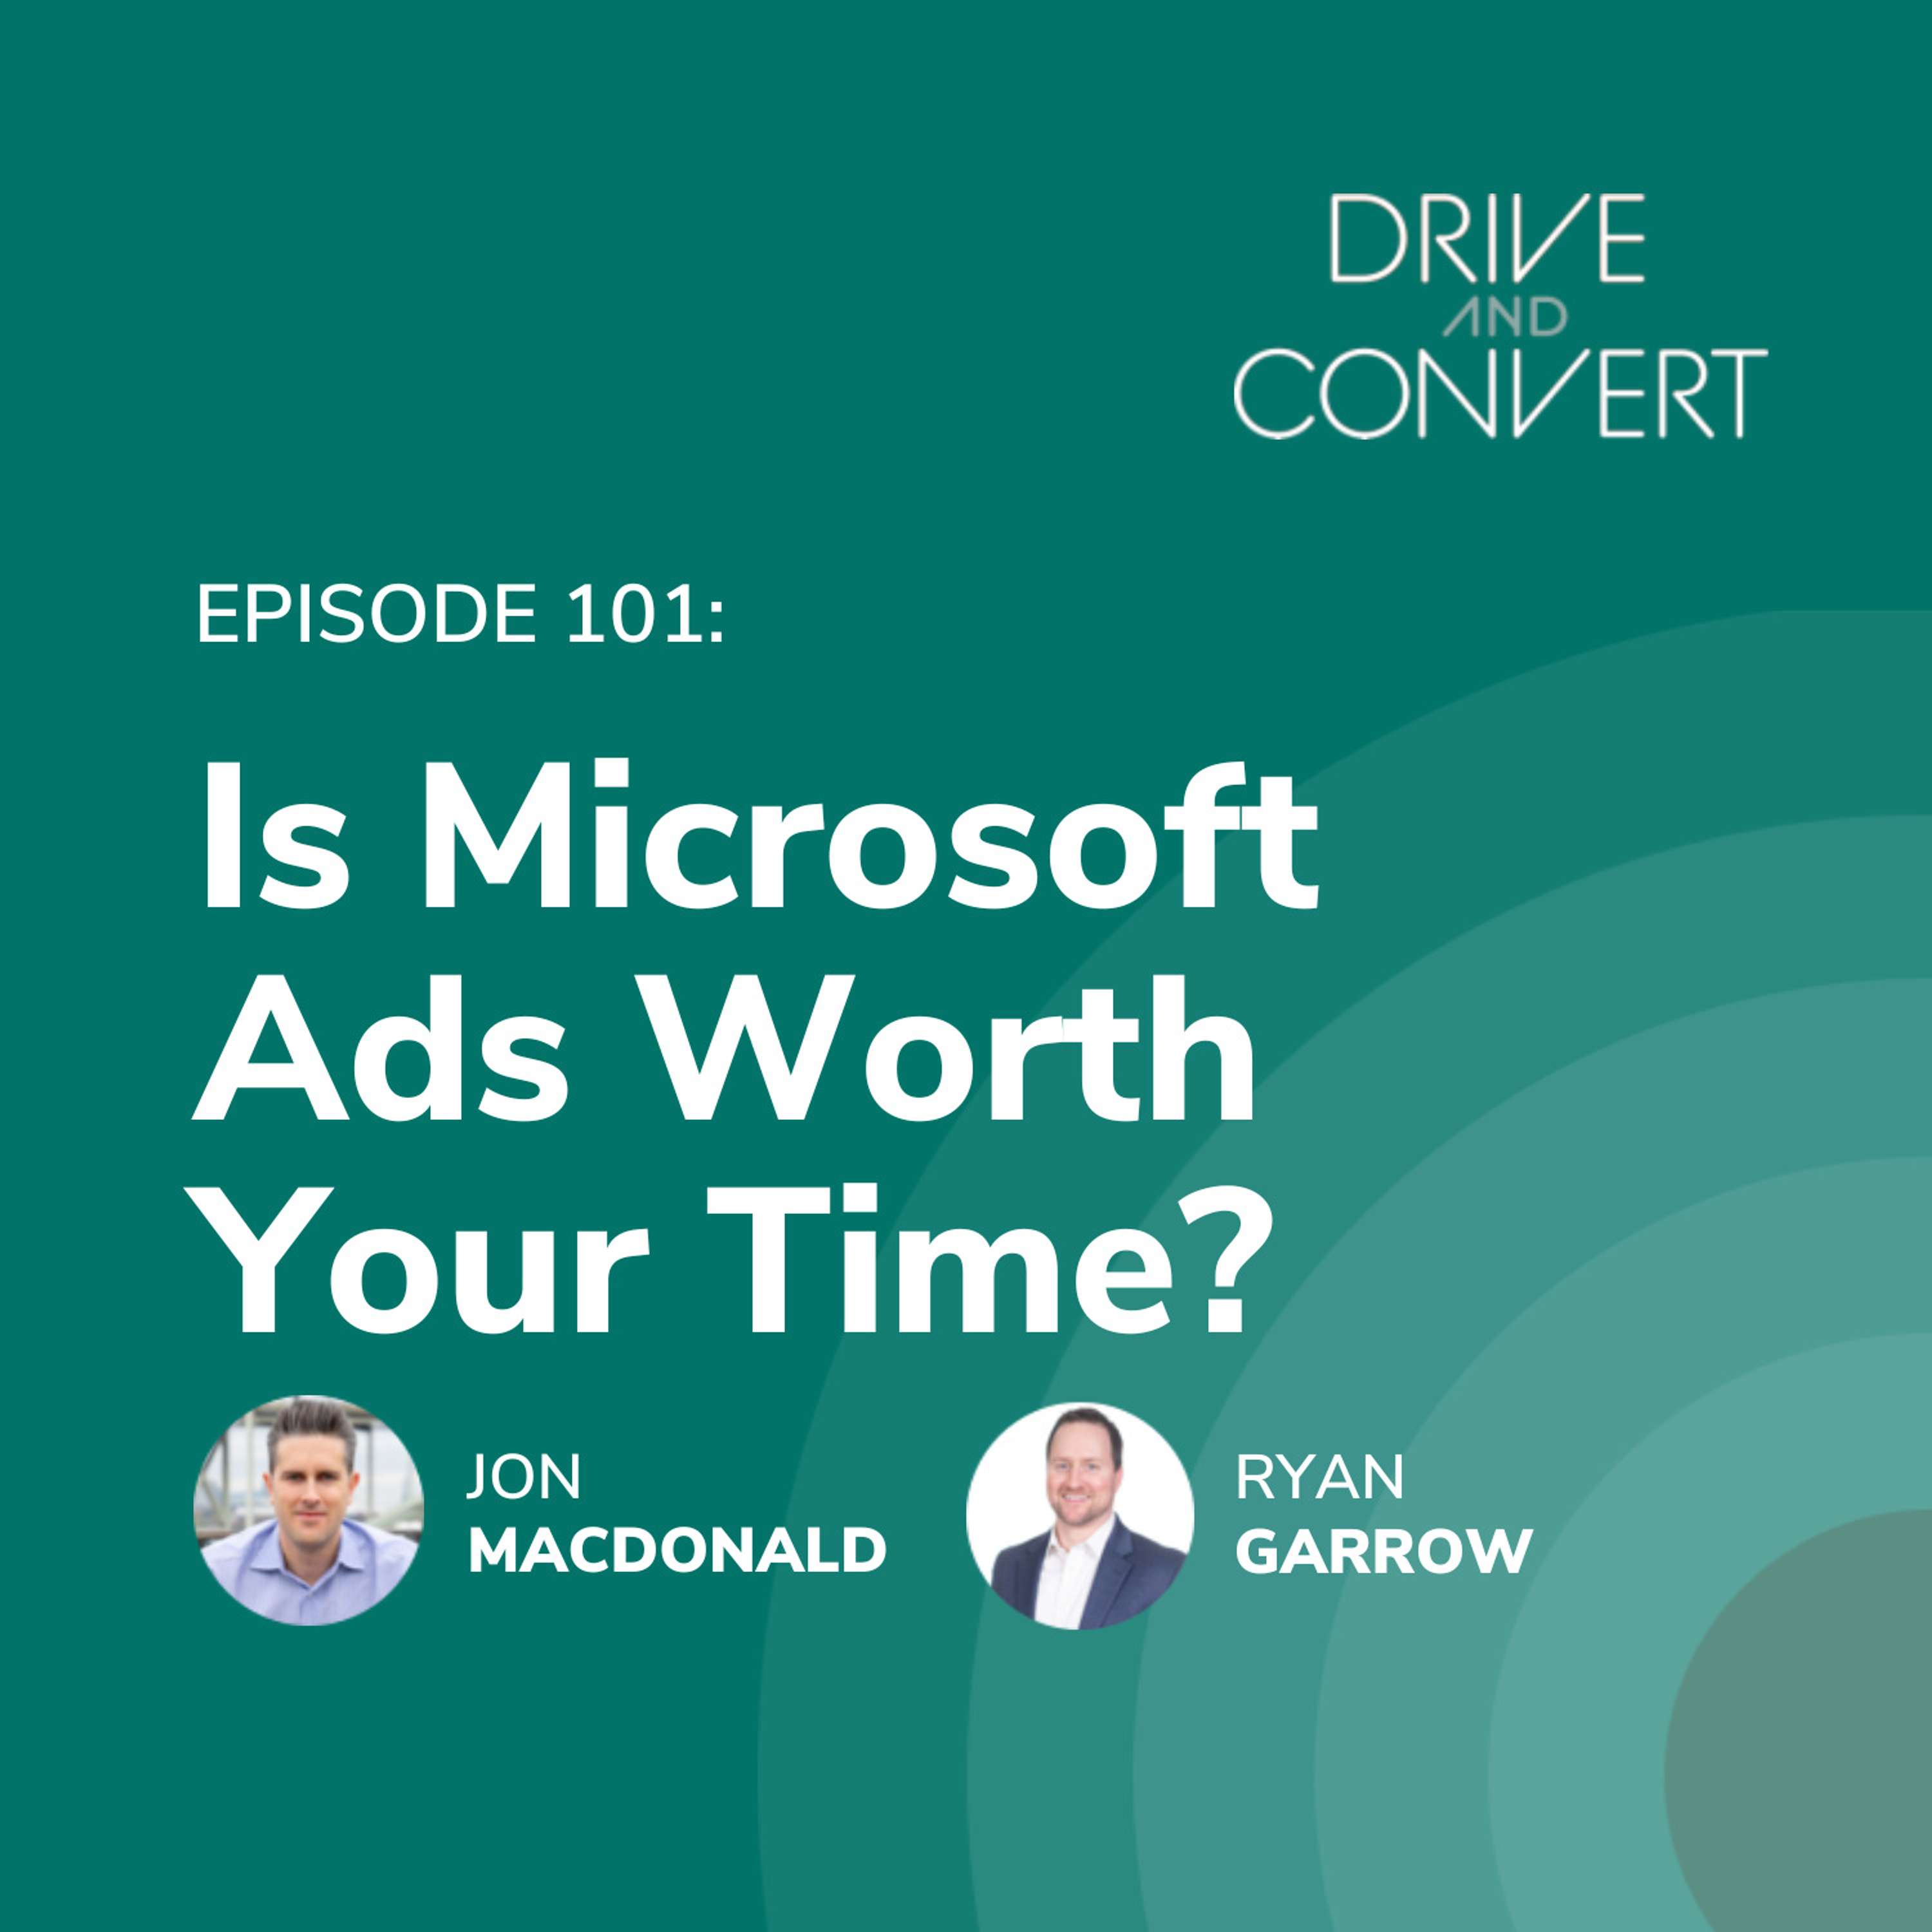 Episode 101: Is Microsoft Ads Worth Your Time?